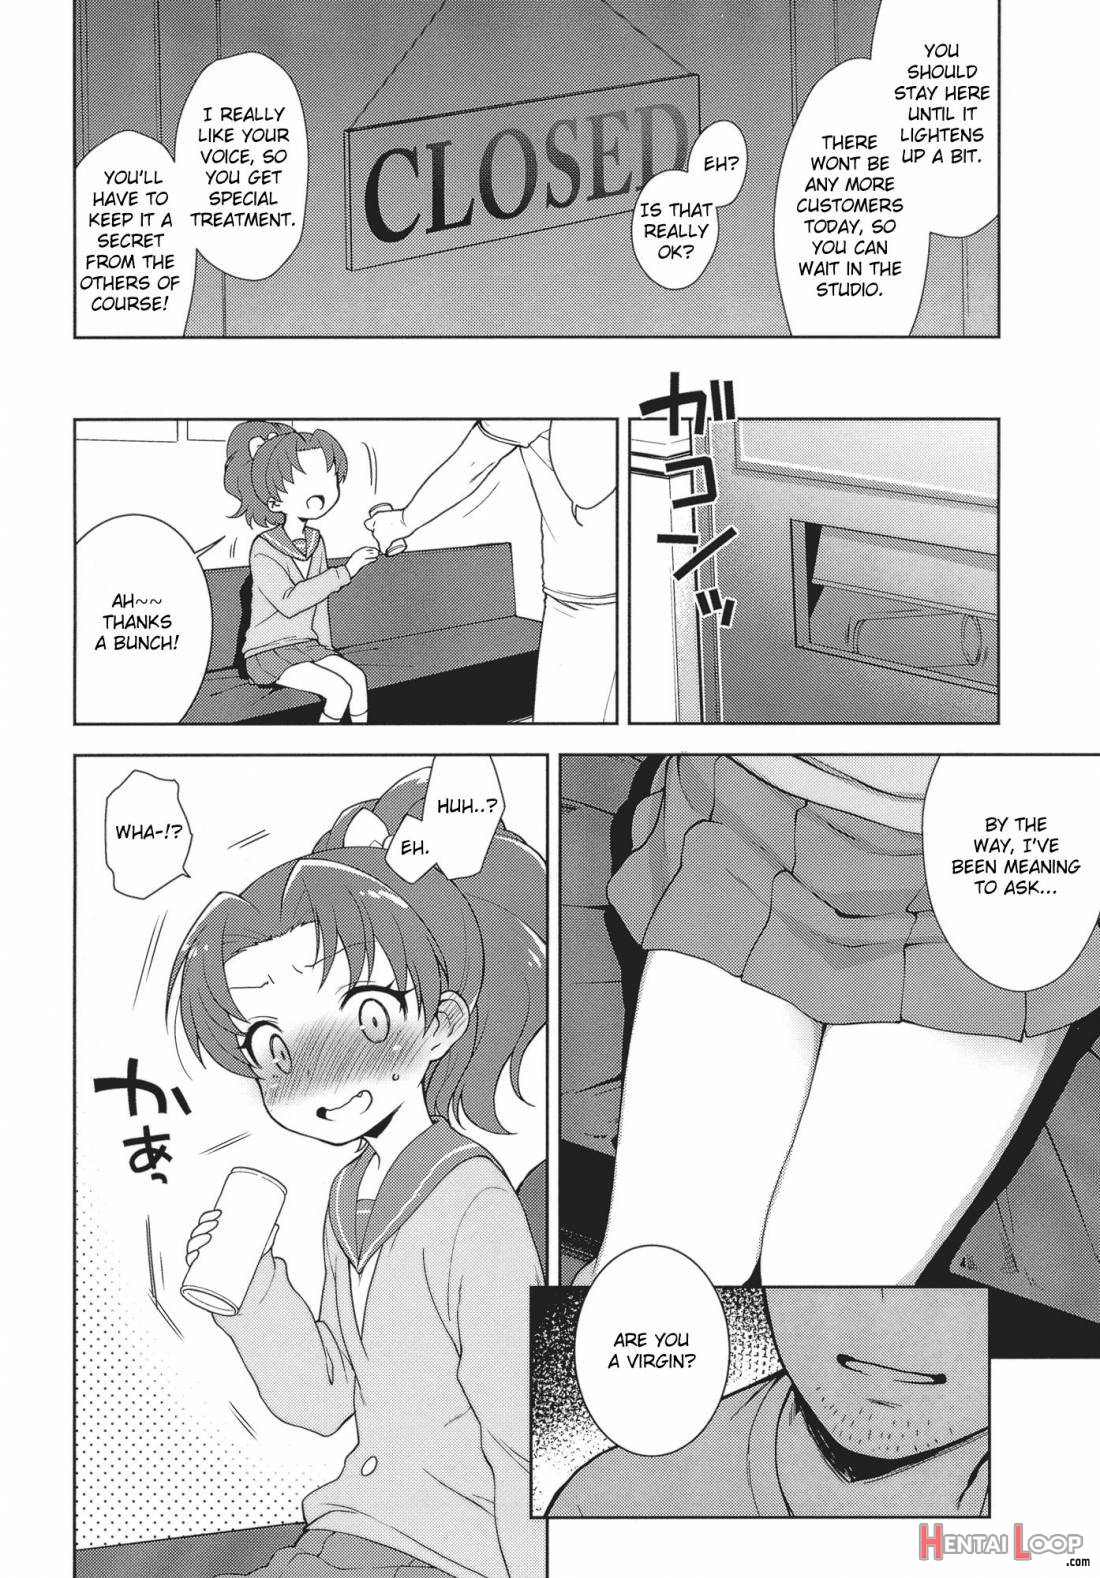 Aoi-chan Gets Fucked: The Book page 3